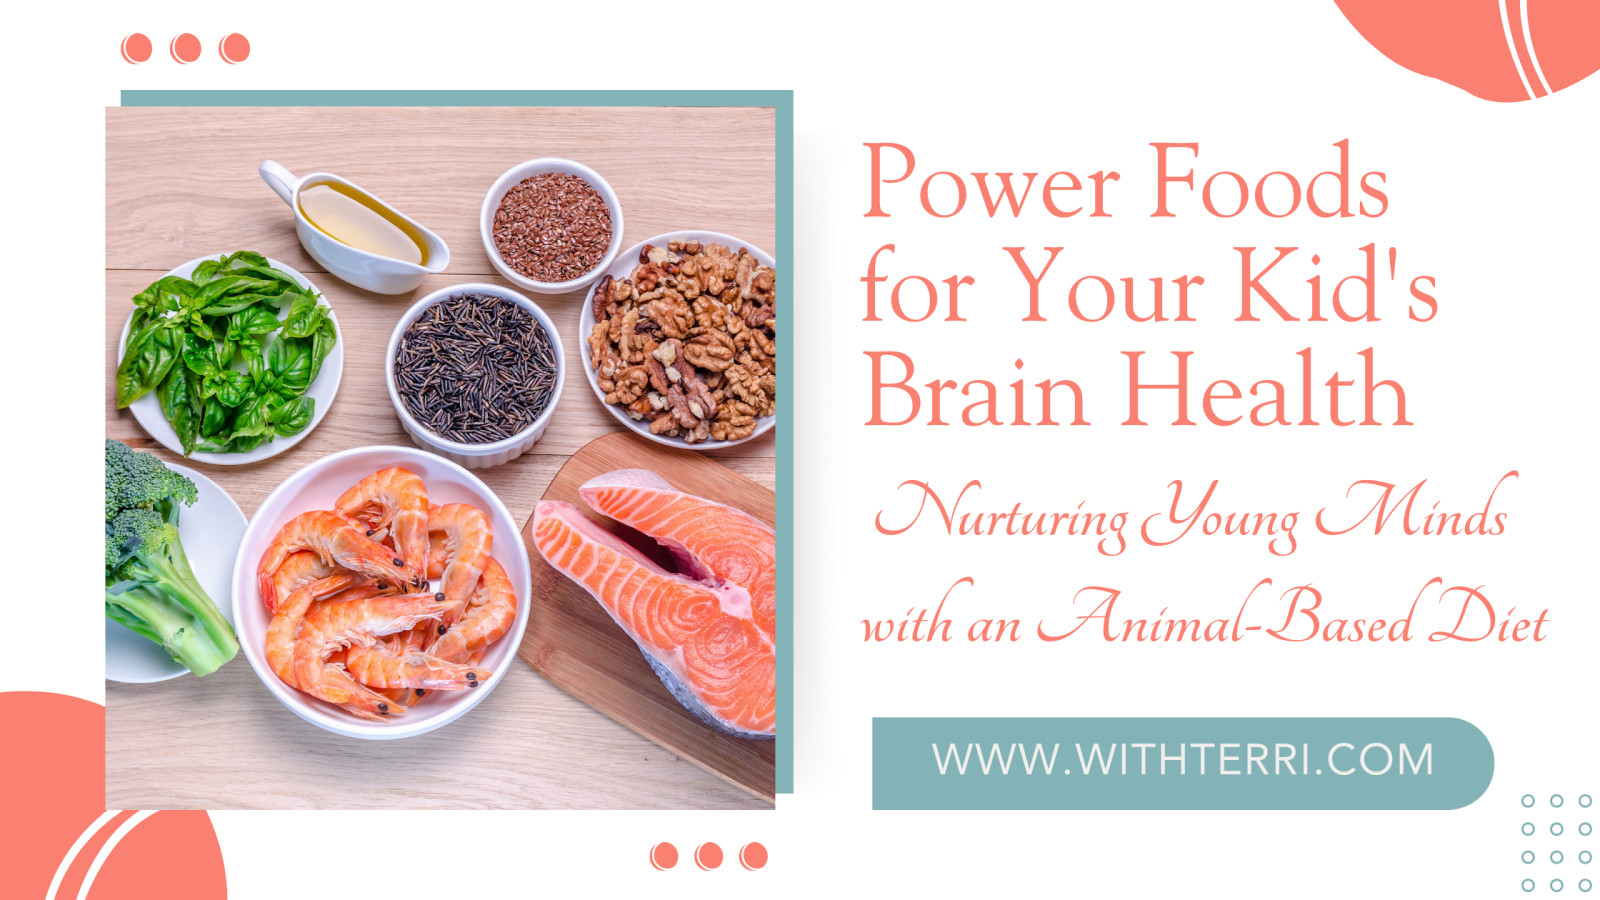 Power Foods for Your Kids' Brain Health